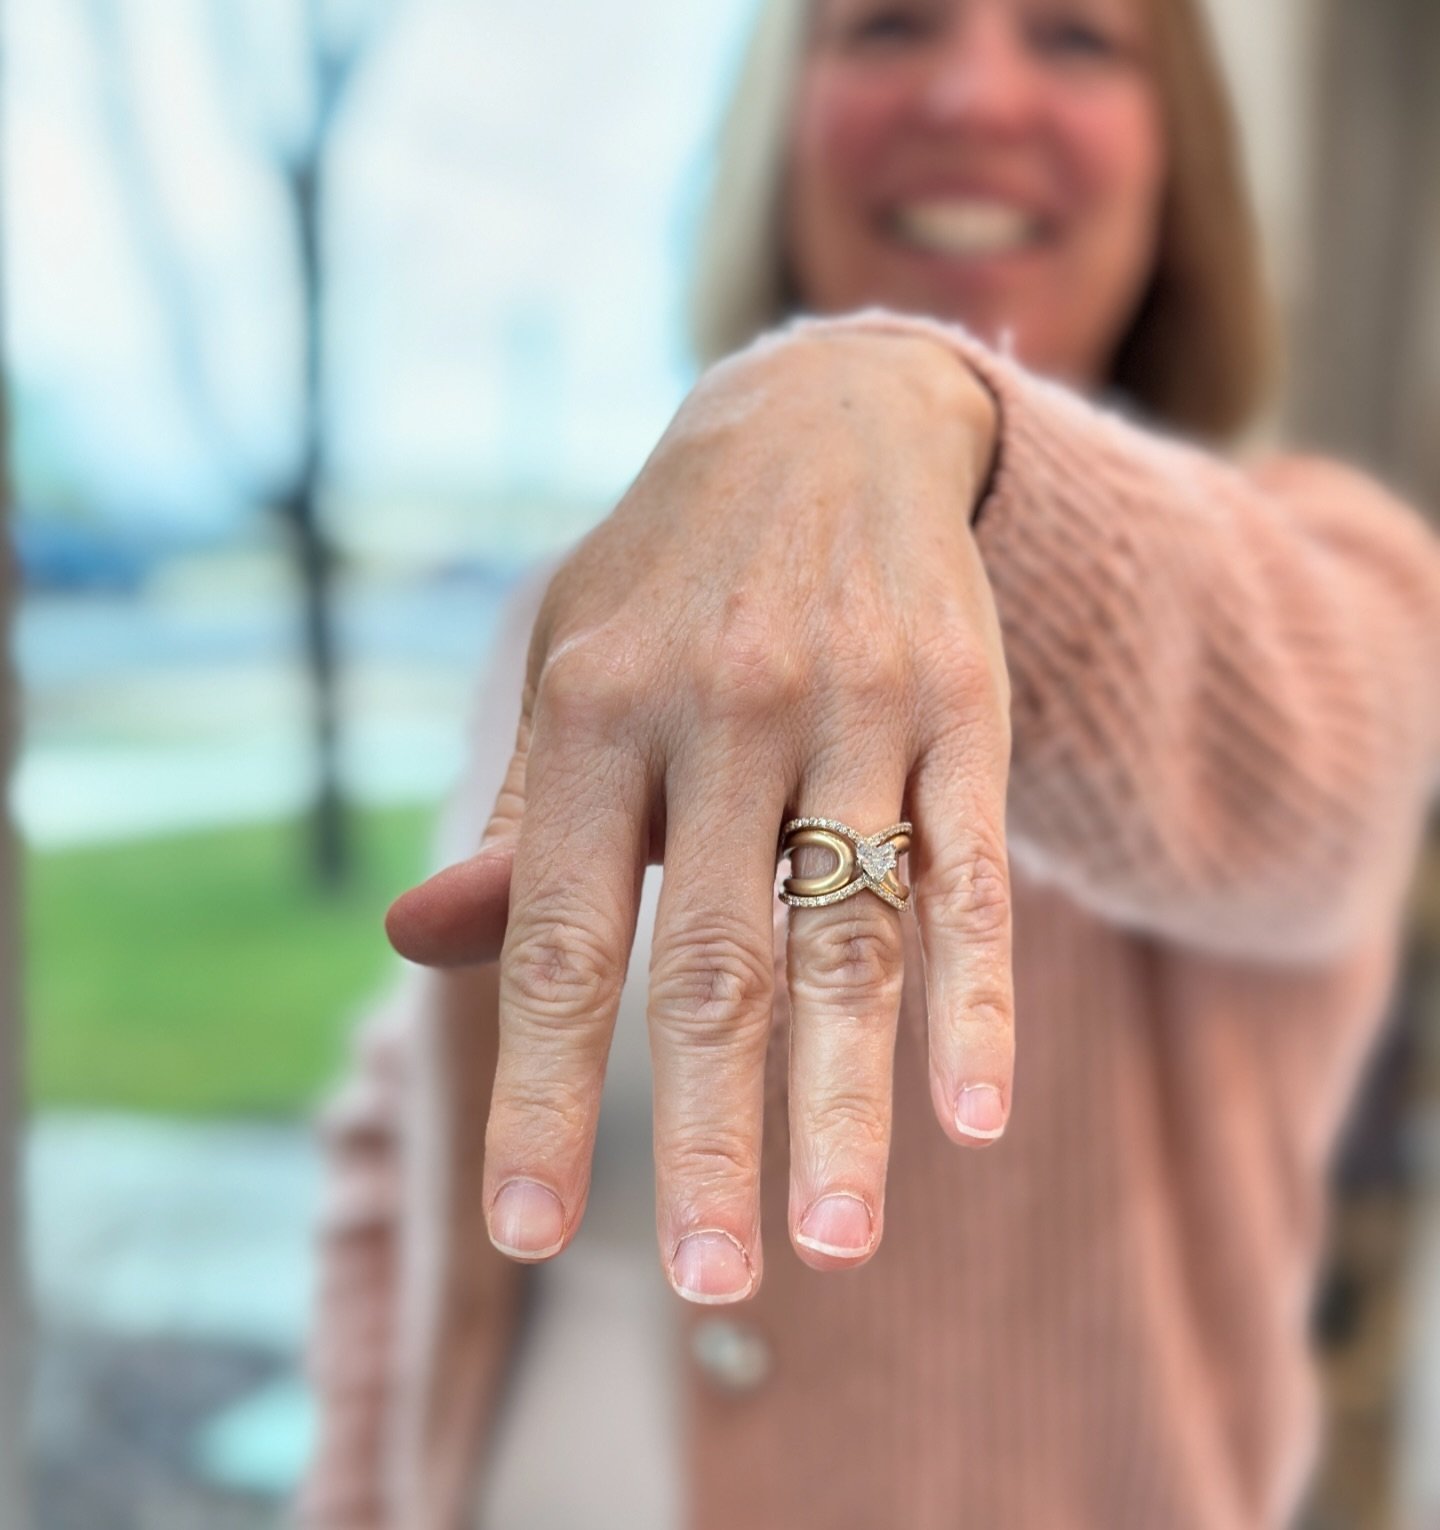 Check out this incredible custom work done by our goldsmith 👏 

This gorgeous gal came to us last week looking for a way to &ldquo;renew&rdquo; her engagement ring. We kept her original heart-shape diamond and she chose a shank to place the diamond 